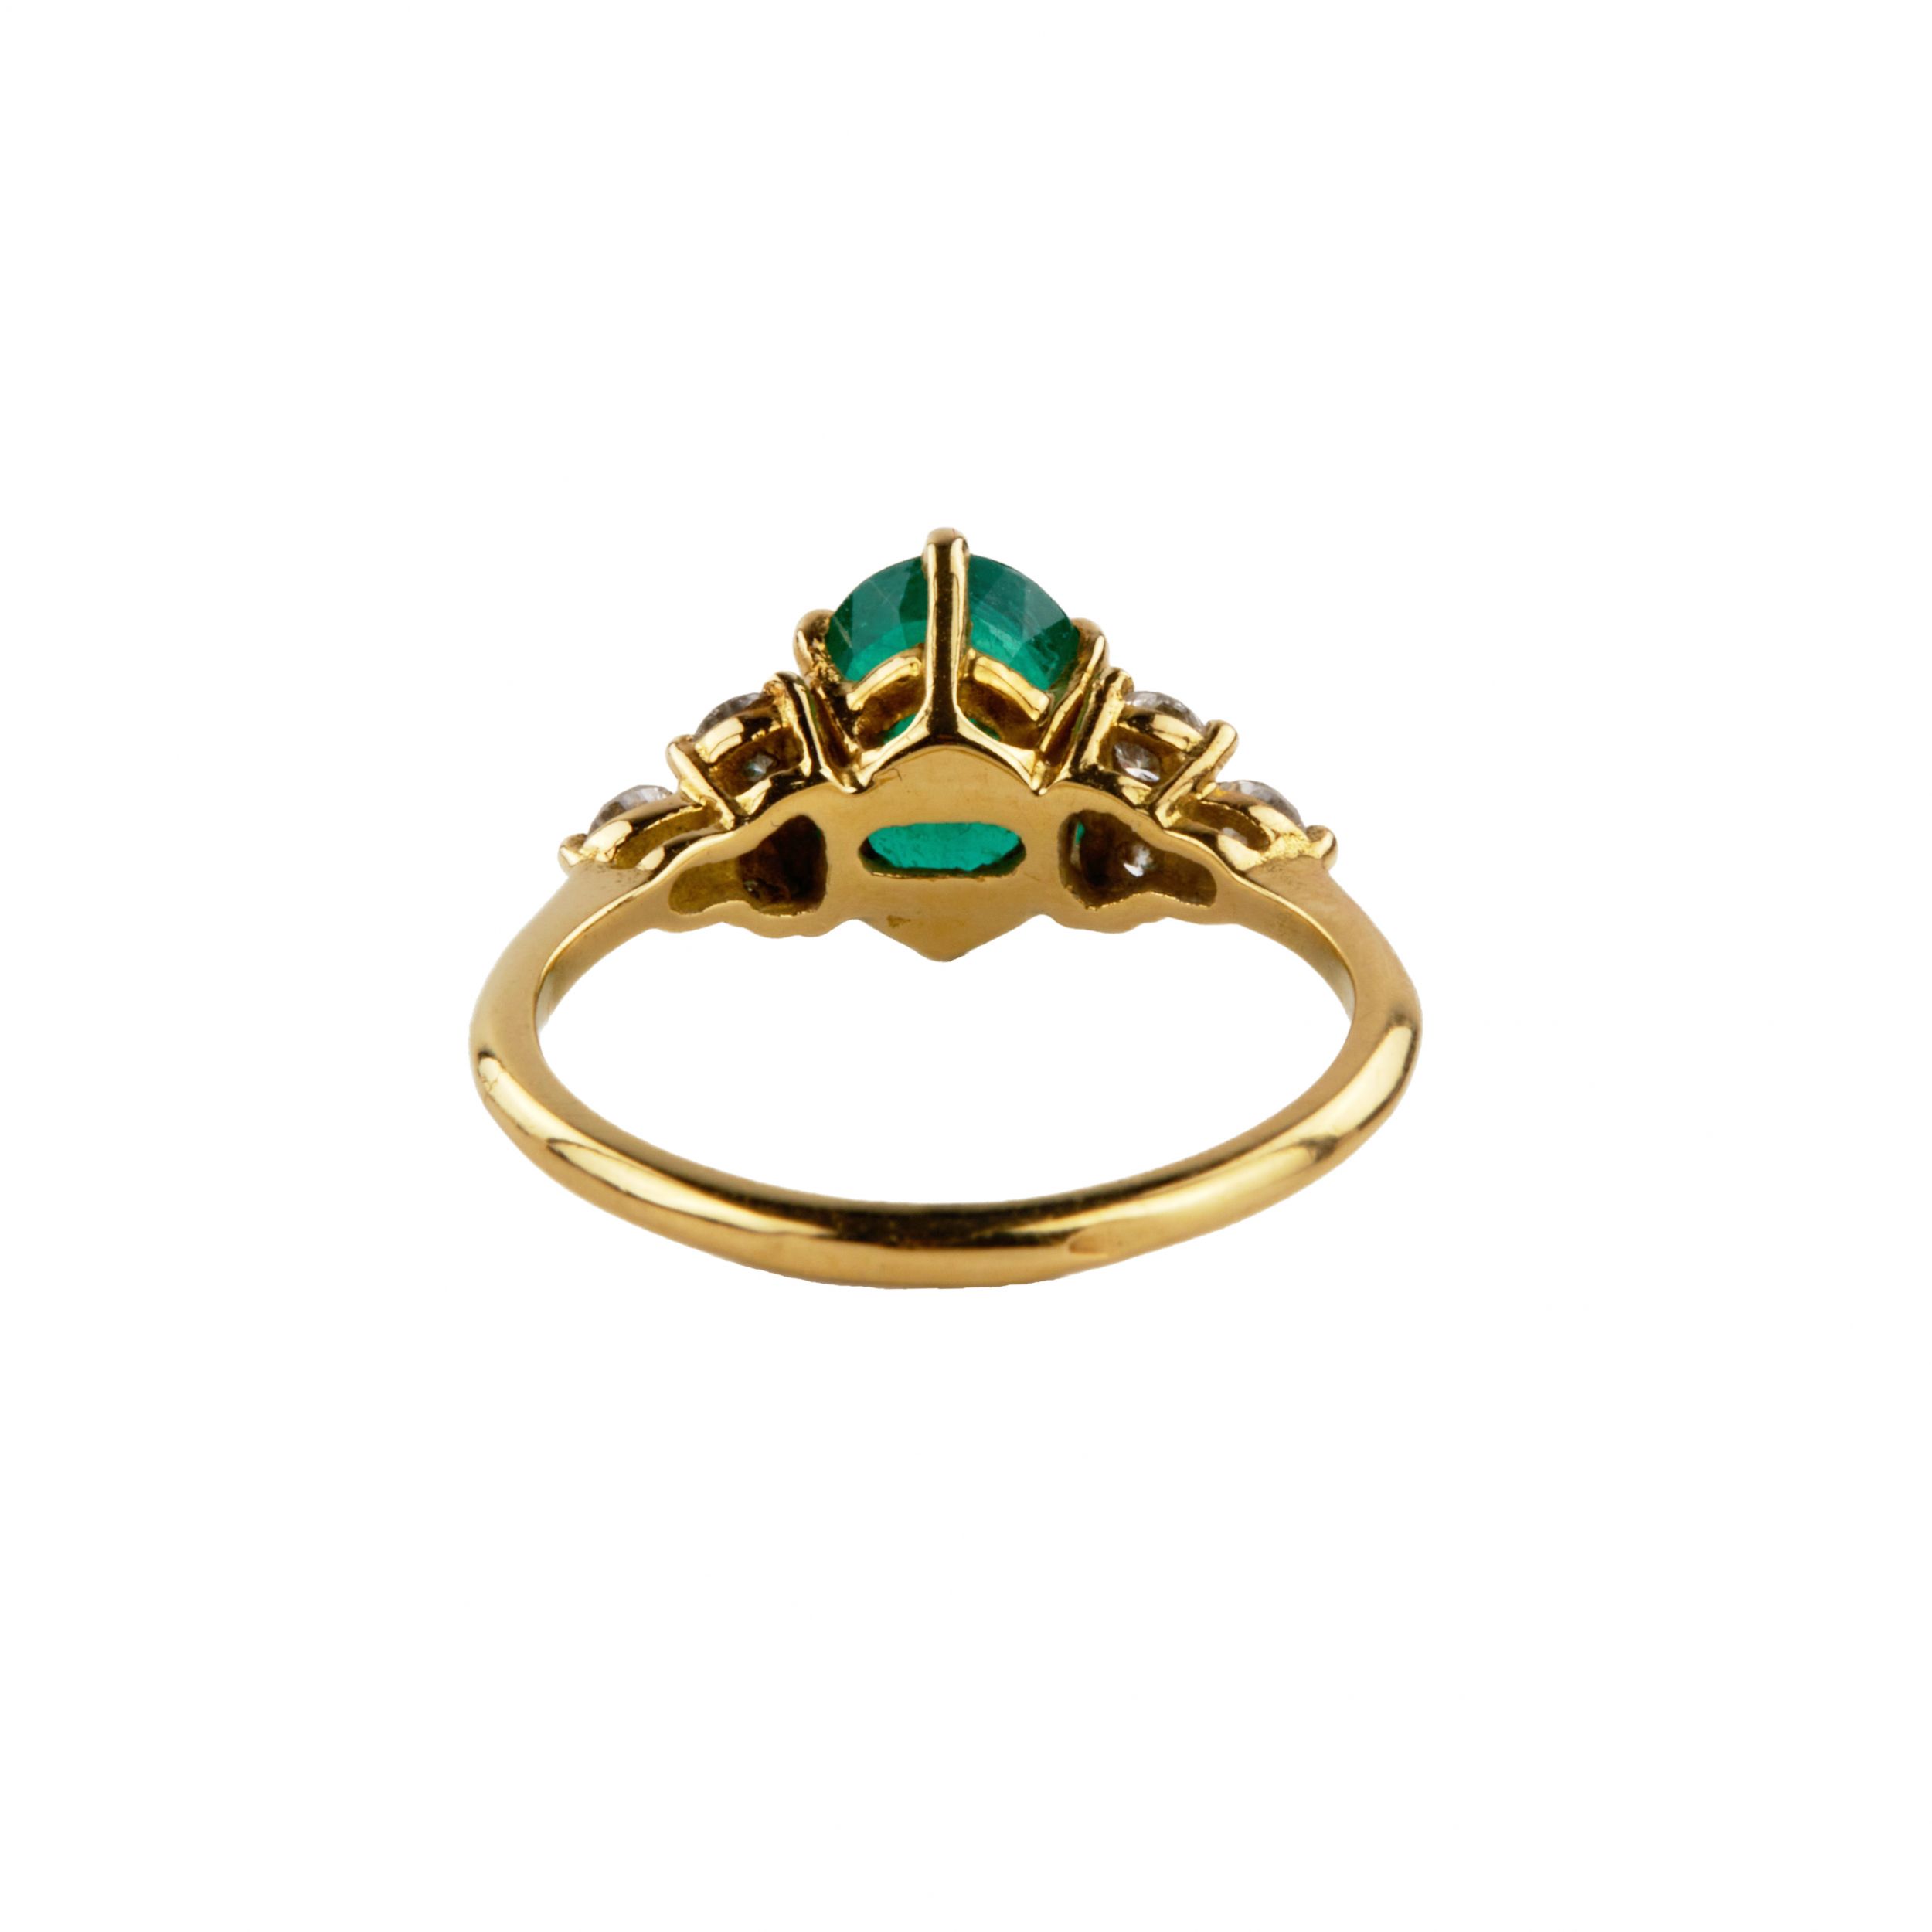 Gold ring with emerald and diamonds, classic design, total weight 3.10 gr. Colombian emerald 1.6 ct. - Image 5 of 5